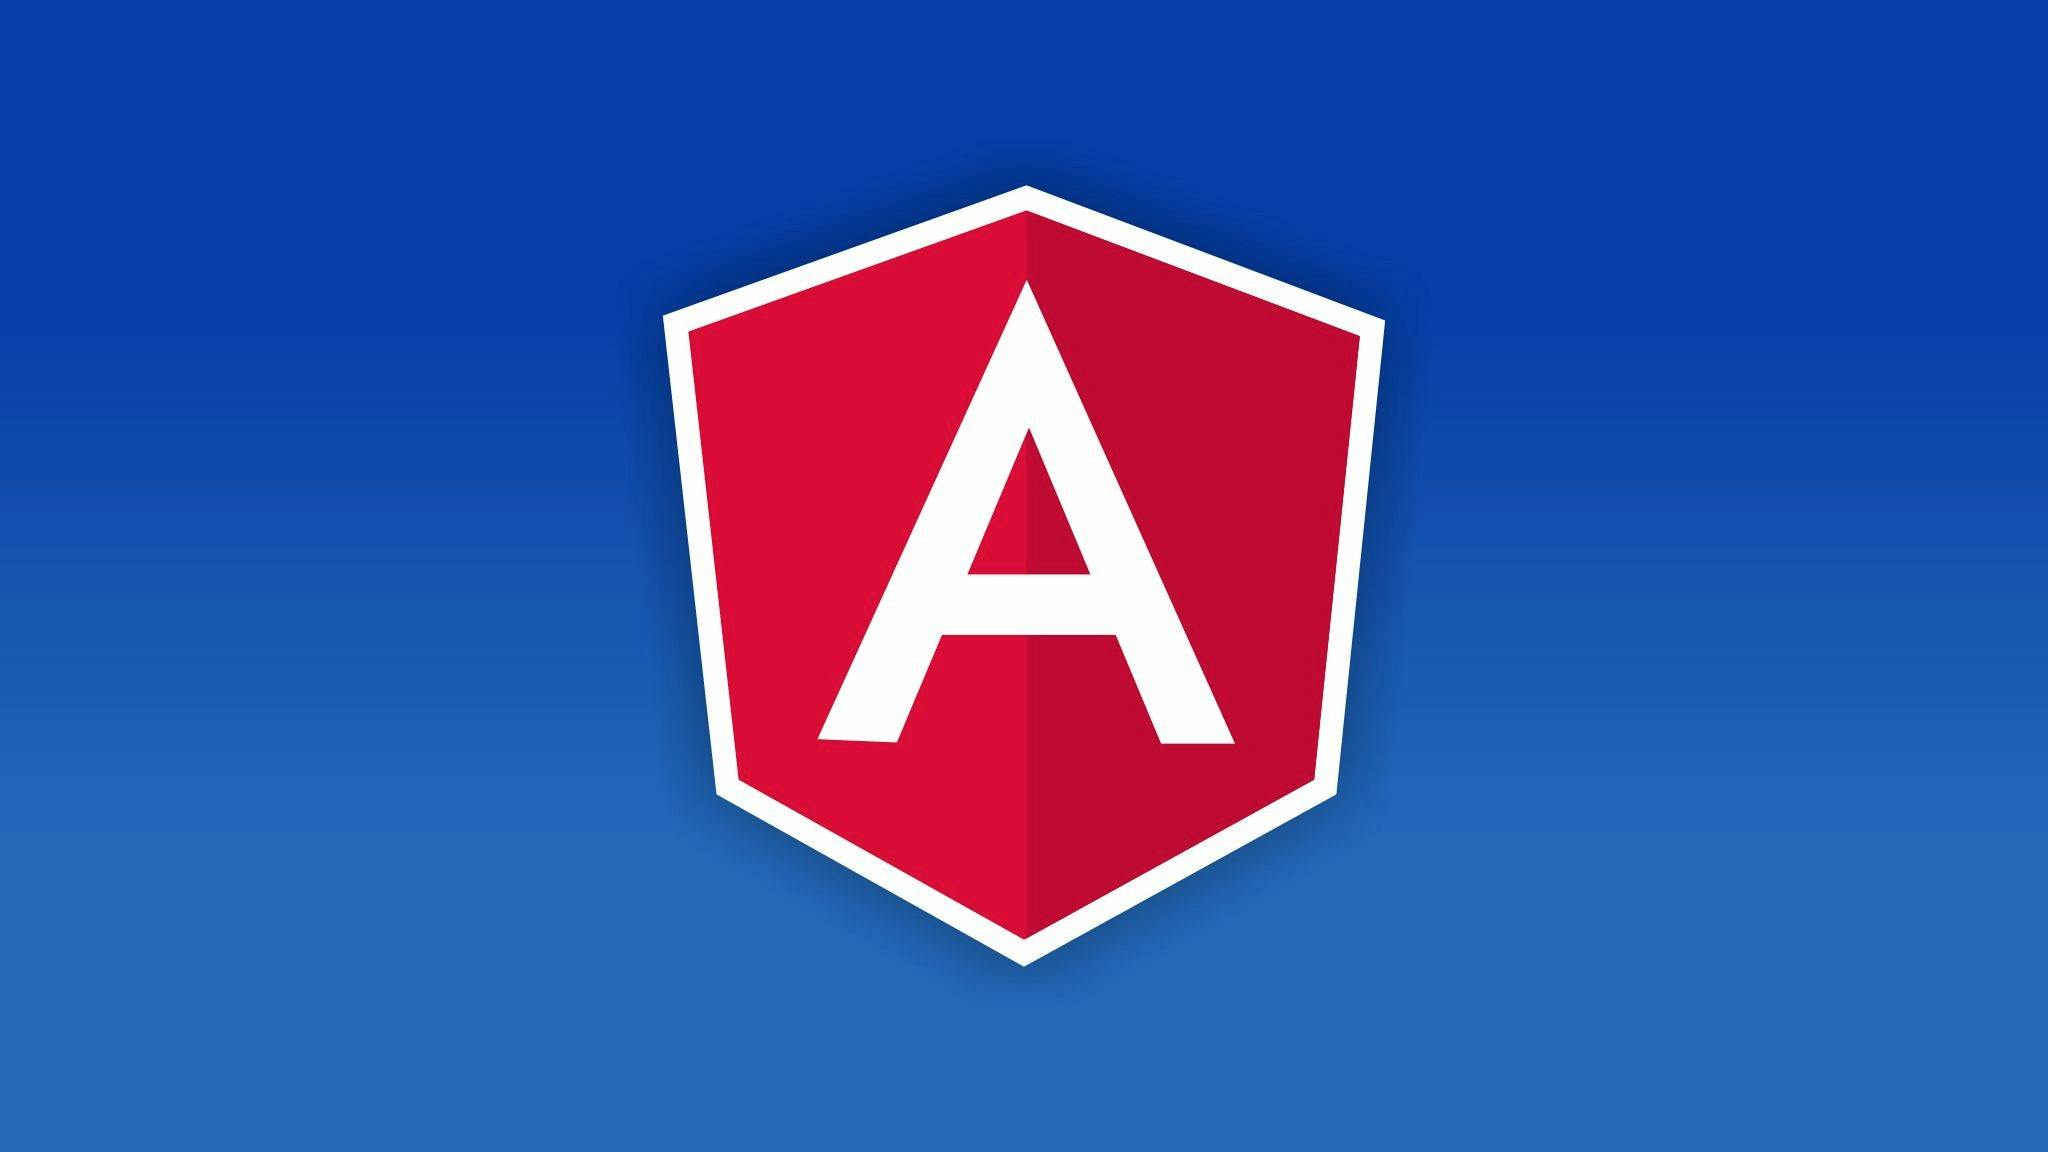 Angular 4 Crash Course for Busy Developers